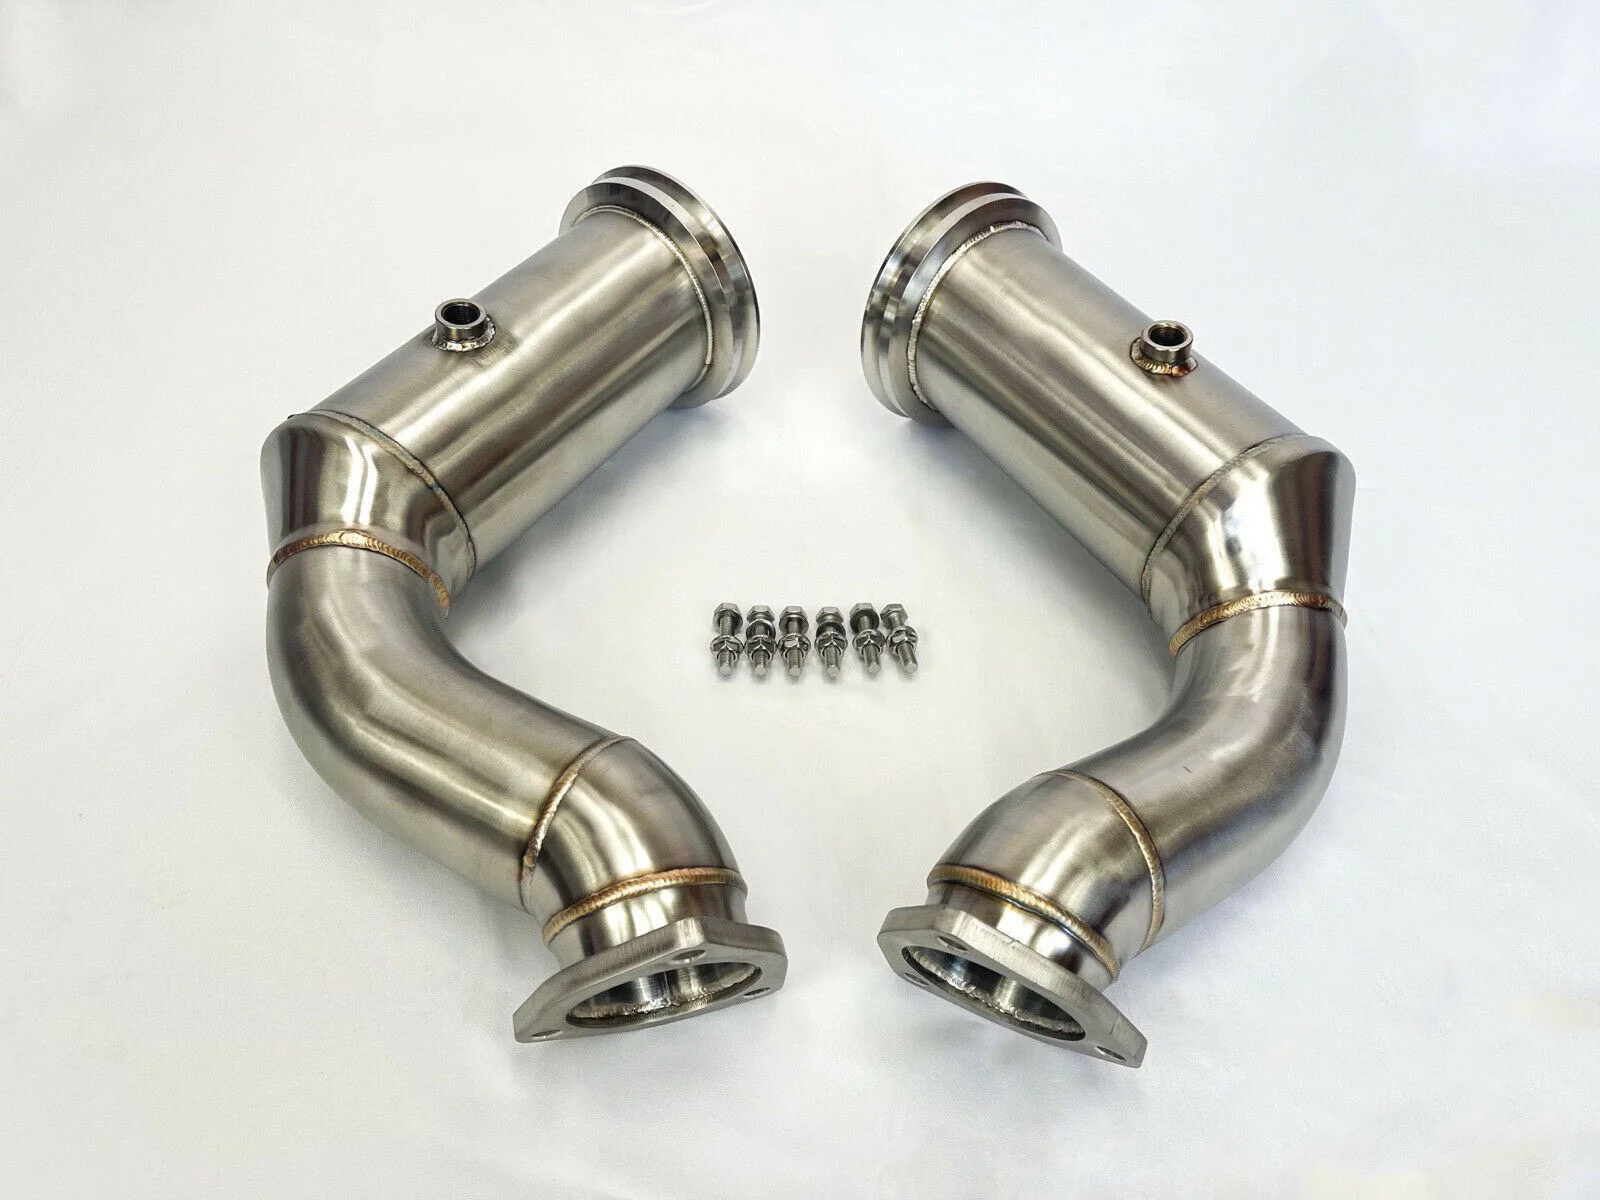 MODE Design Decatted Downpipes for Audi SQ7 SQ8 RSQ8 4M - MODE Auto Concepts